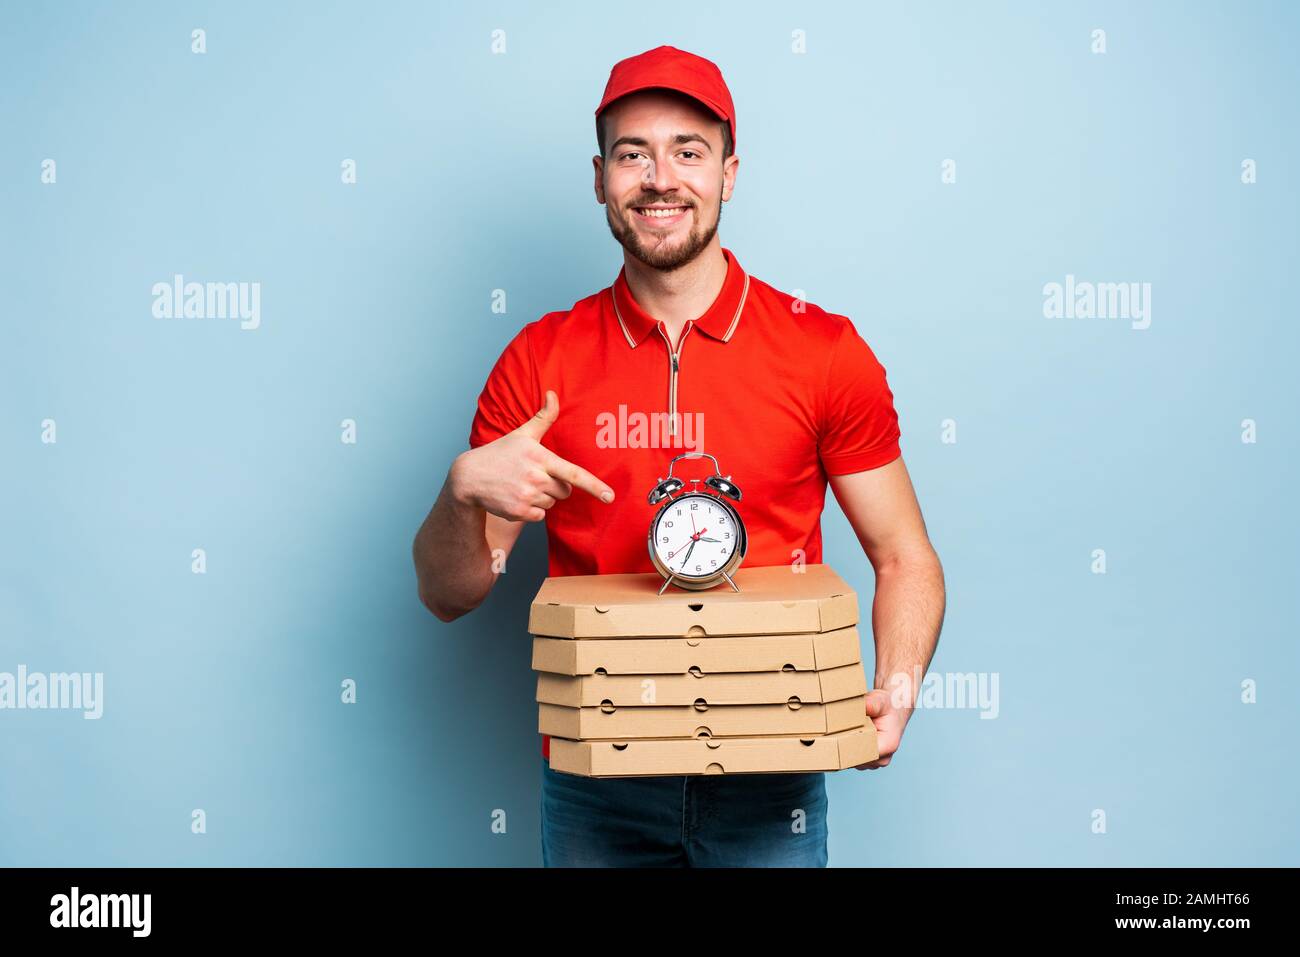 Deliveryman is punctual to deliver quickly pizzas. Cyan background Stock Photo